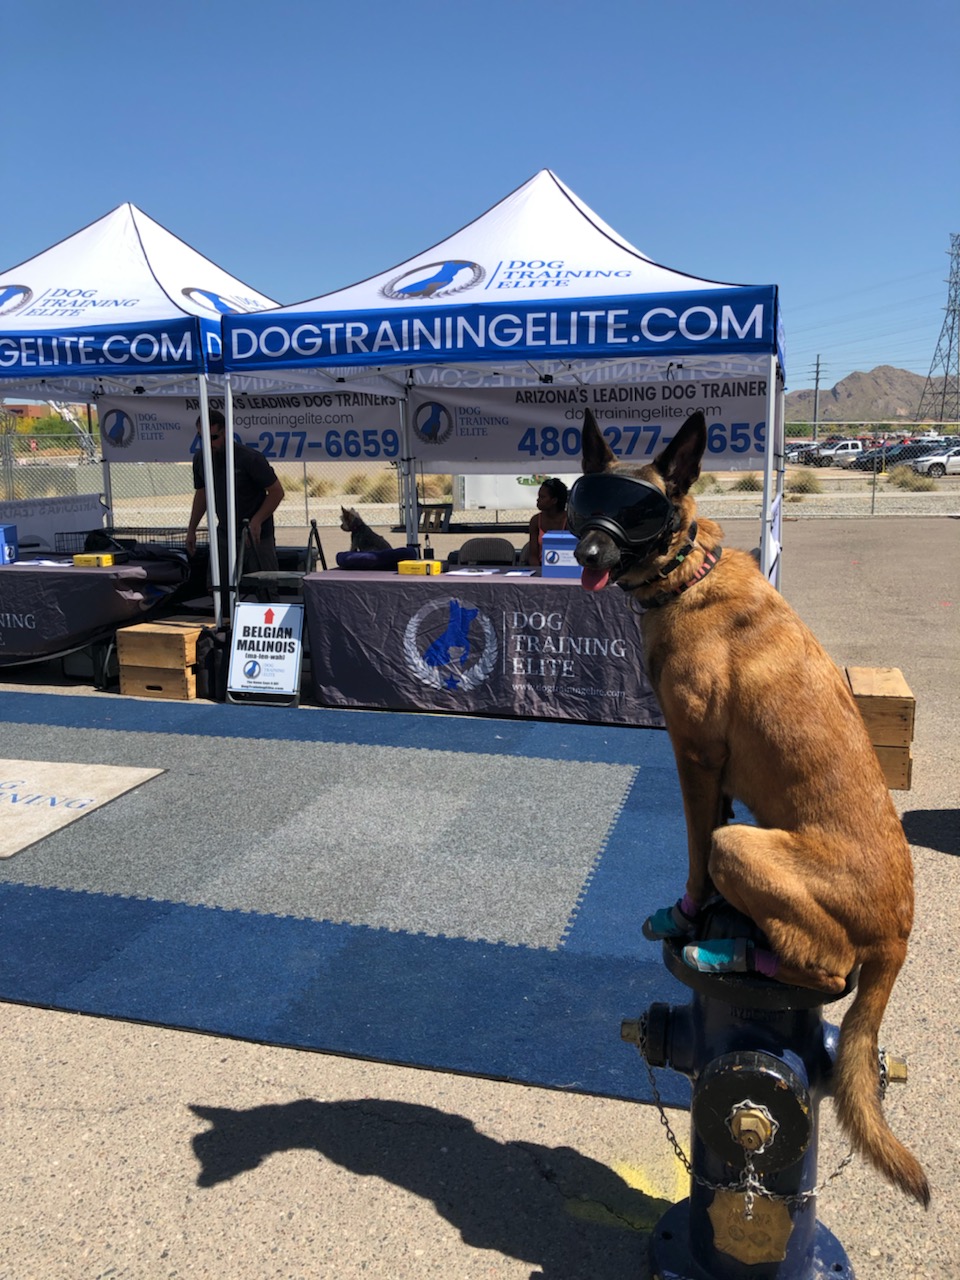 Dog Training Elite's Cute Pup at an franchise event.